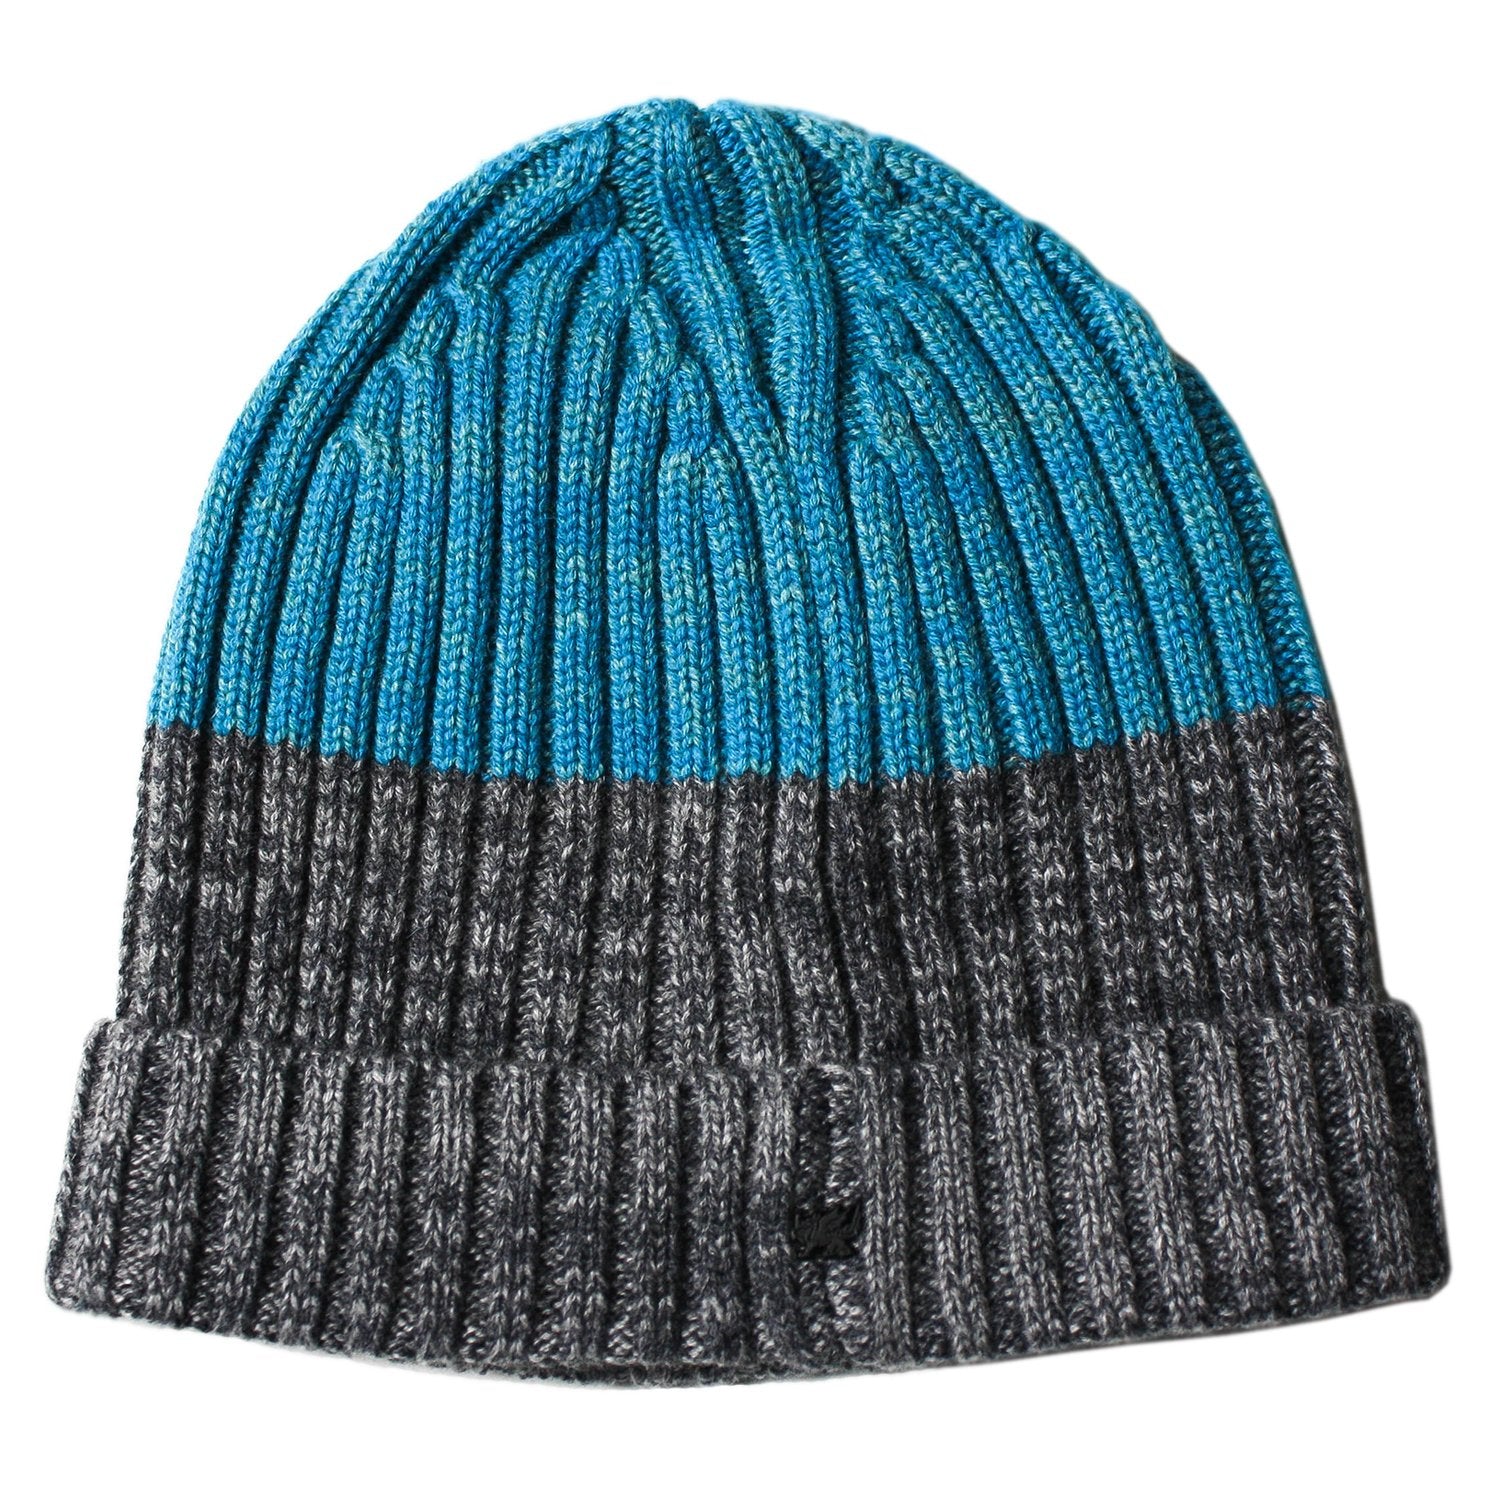 Benny Beanie in Teal/Grey - Lords Of Harlech